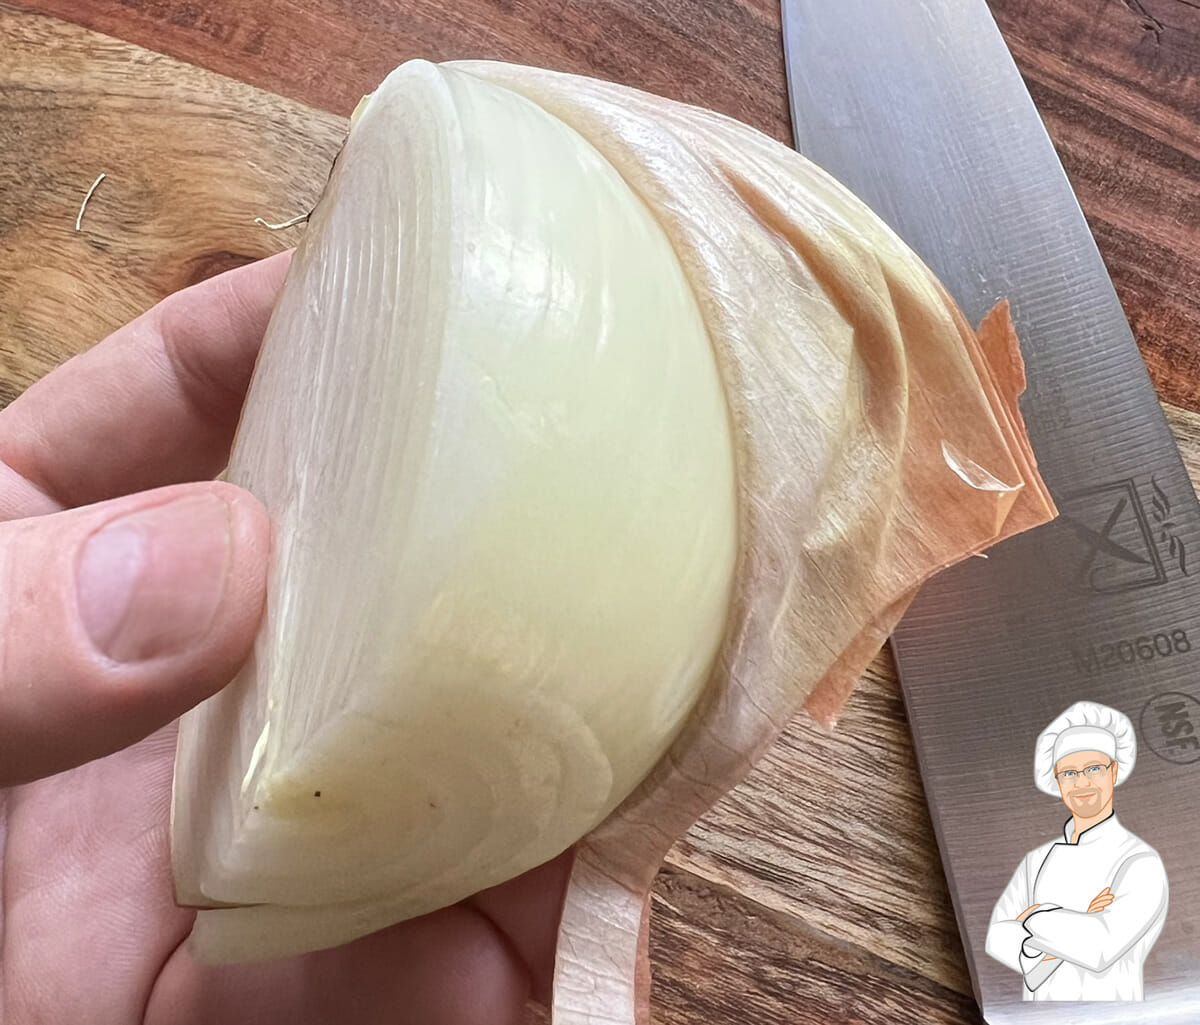 How to peel and chop an onion